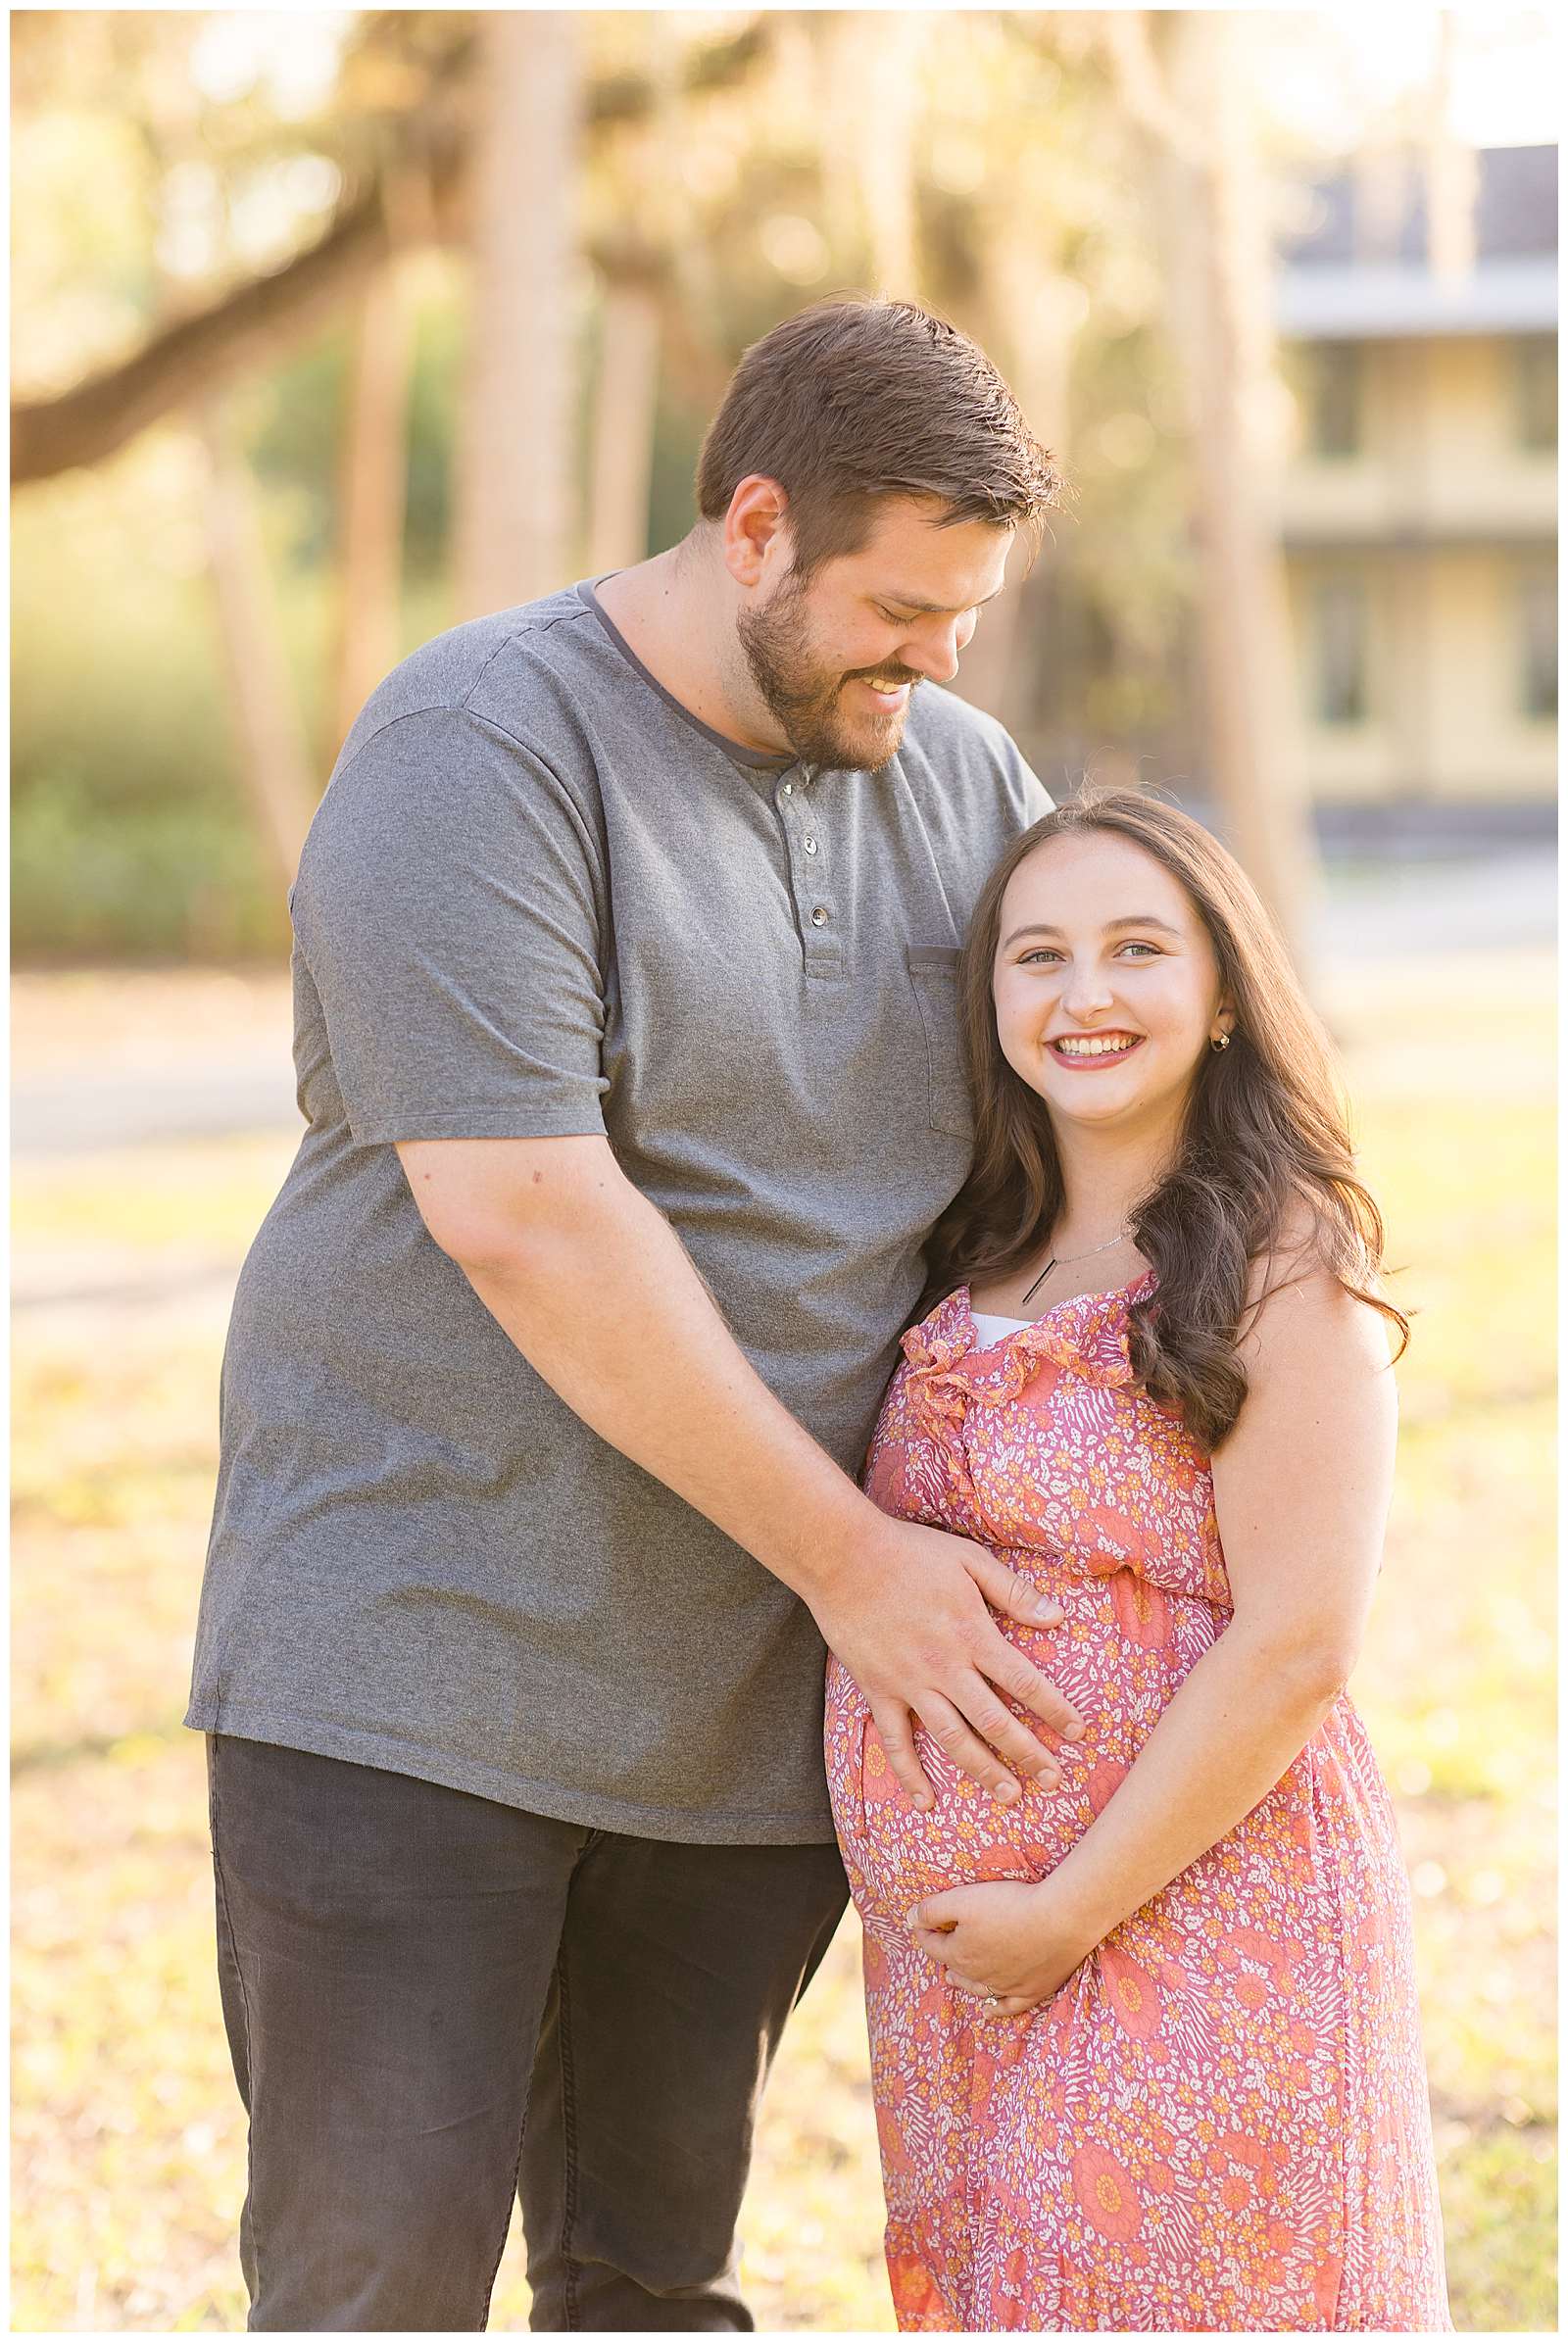 Pregnant momma looks at the camera of Rebecca Rice Photography holding her belly while her husband looks down at her and holds the belly smiling!
-rebeccaricephoto.com